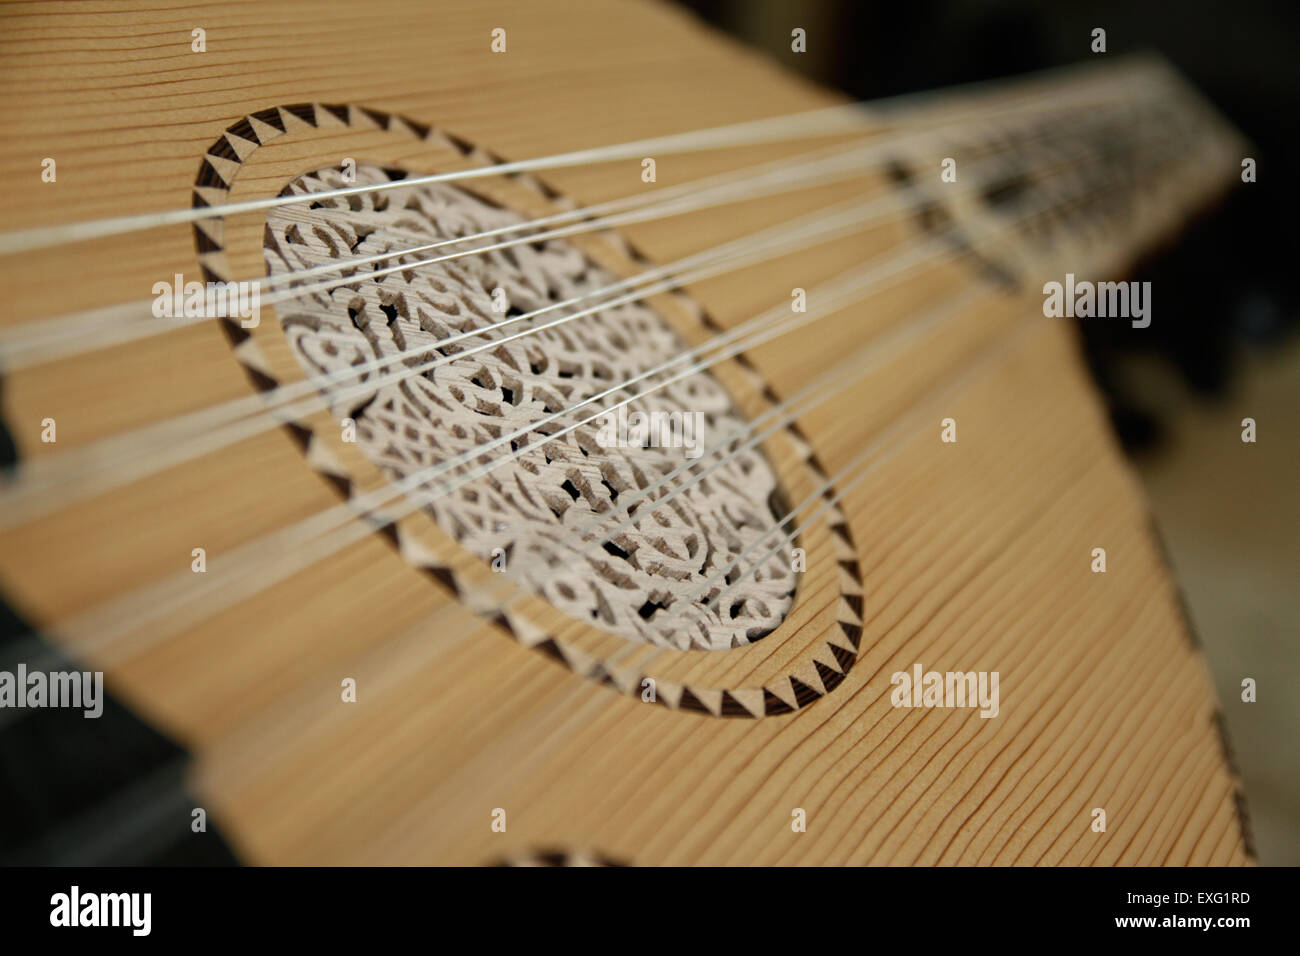 Oud instrument hi-res stock photography and images - Alamy